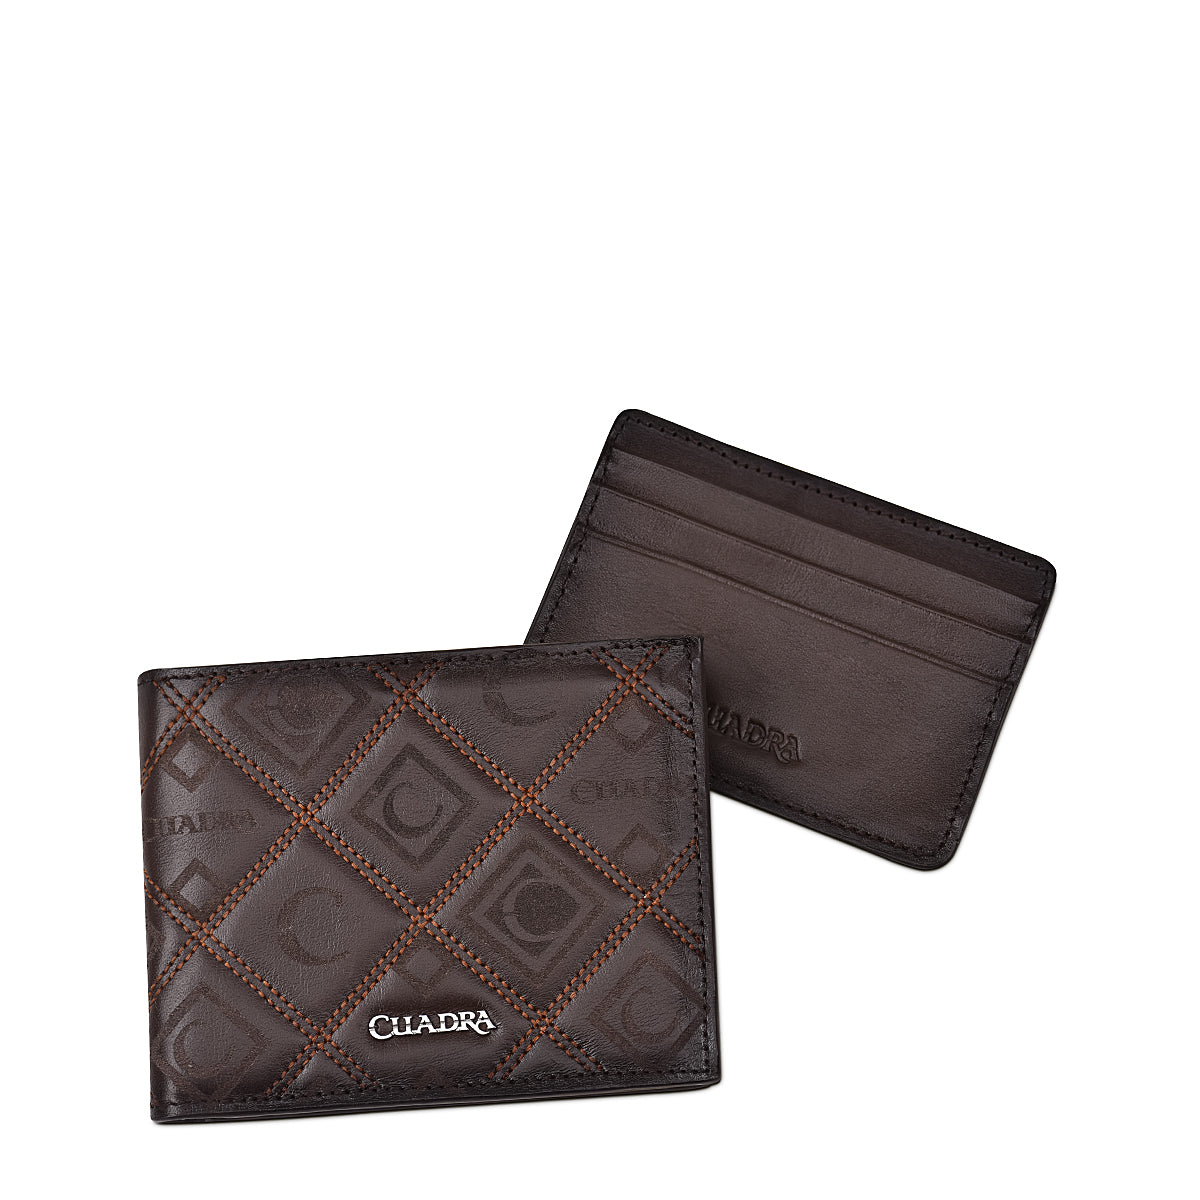 A handy pocket on the back holds four more cards. However, this men's wallet comes with a removable cardholder made from the same quality leather.